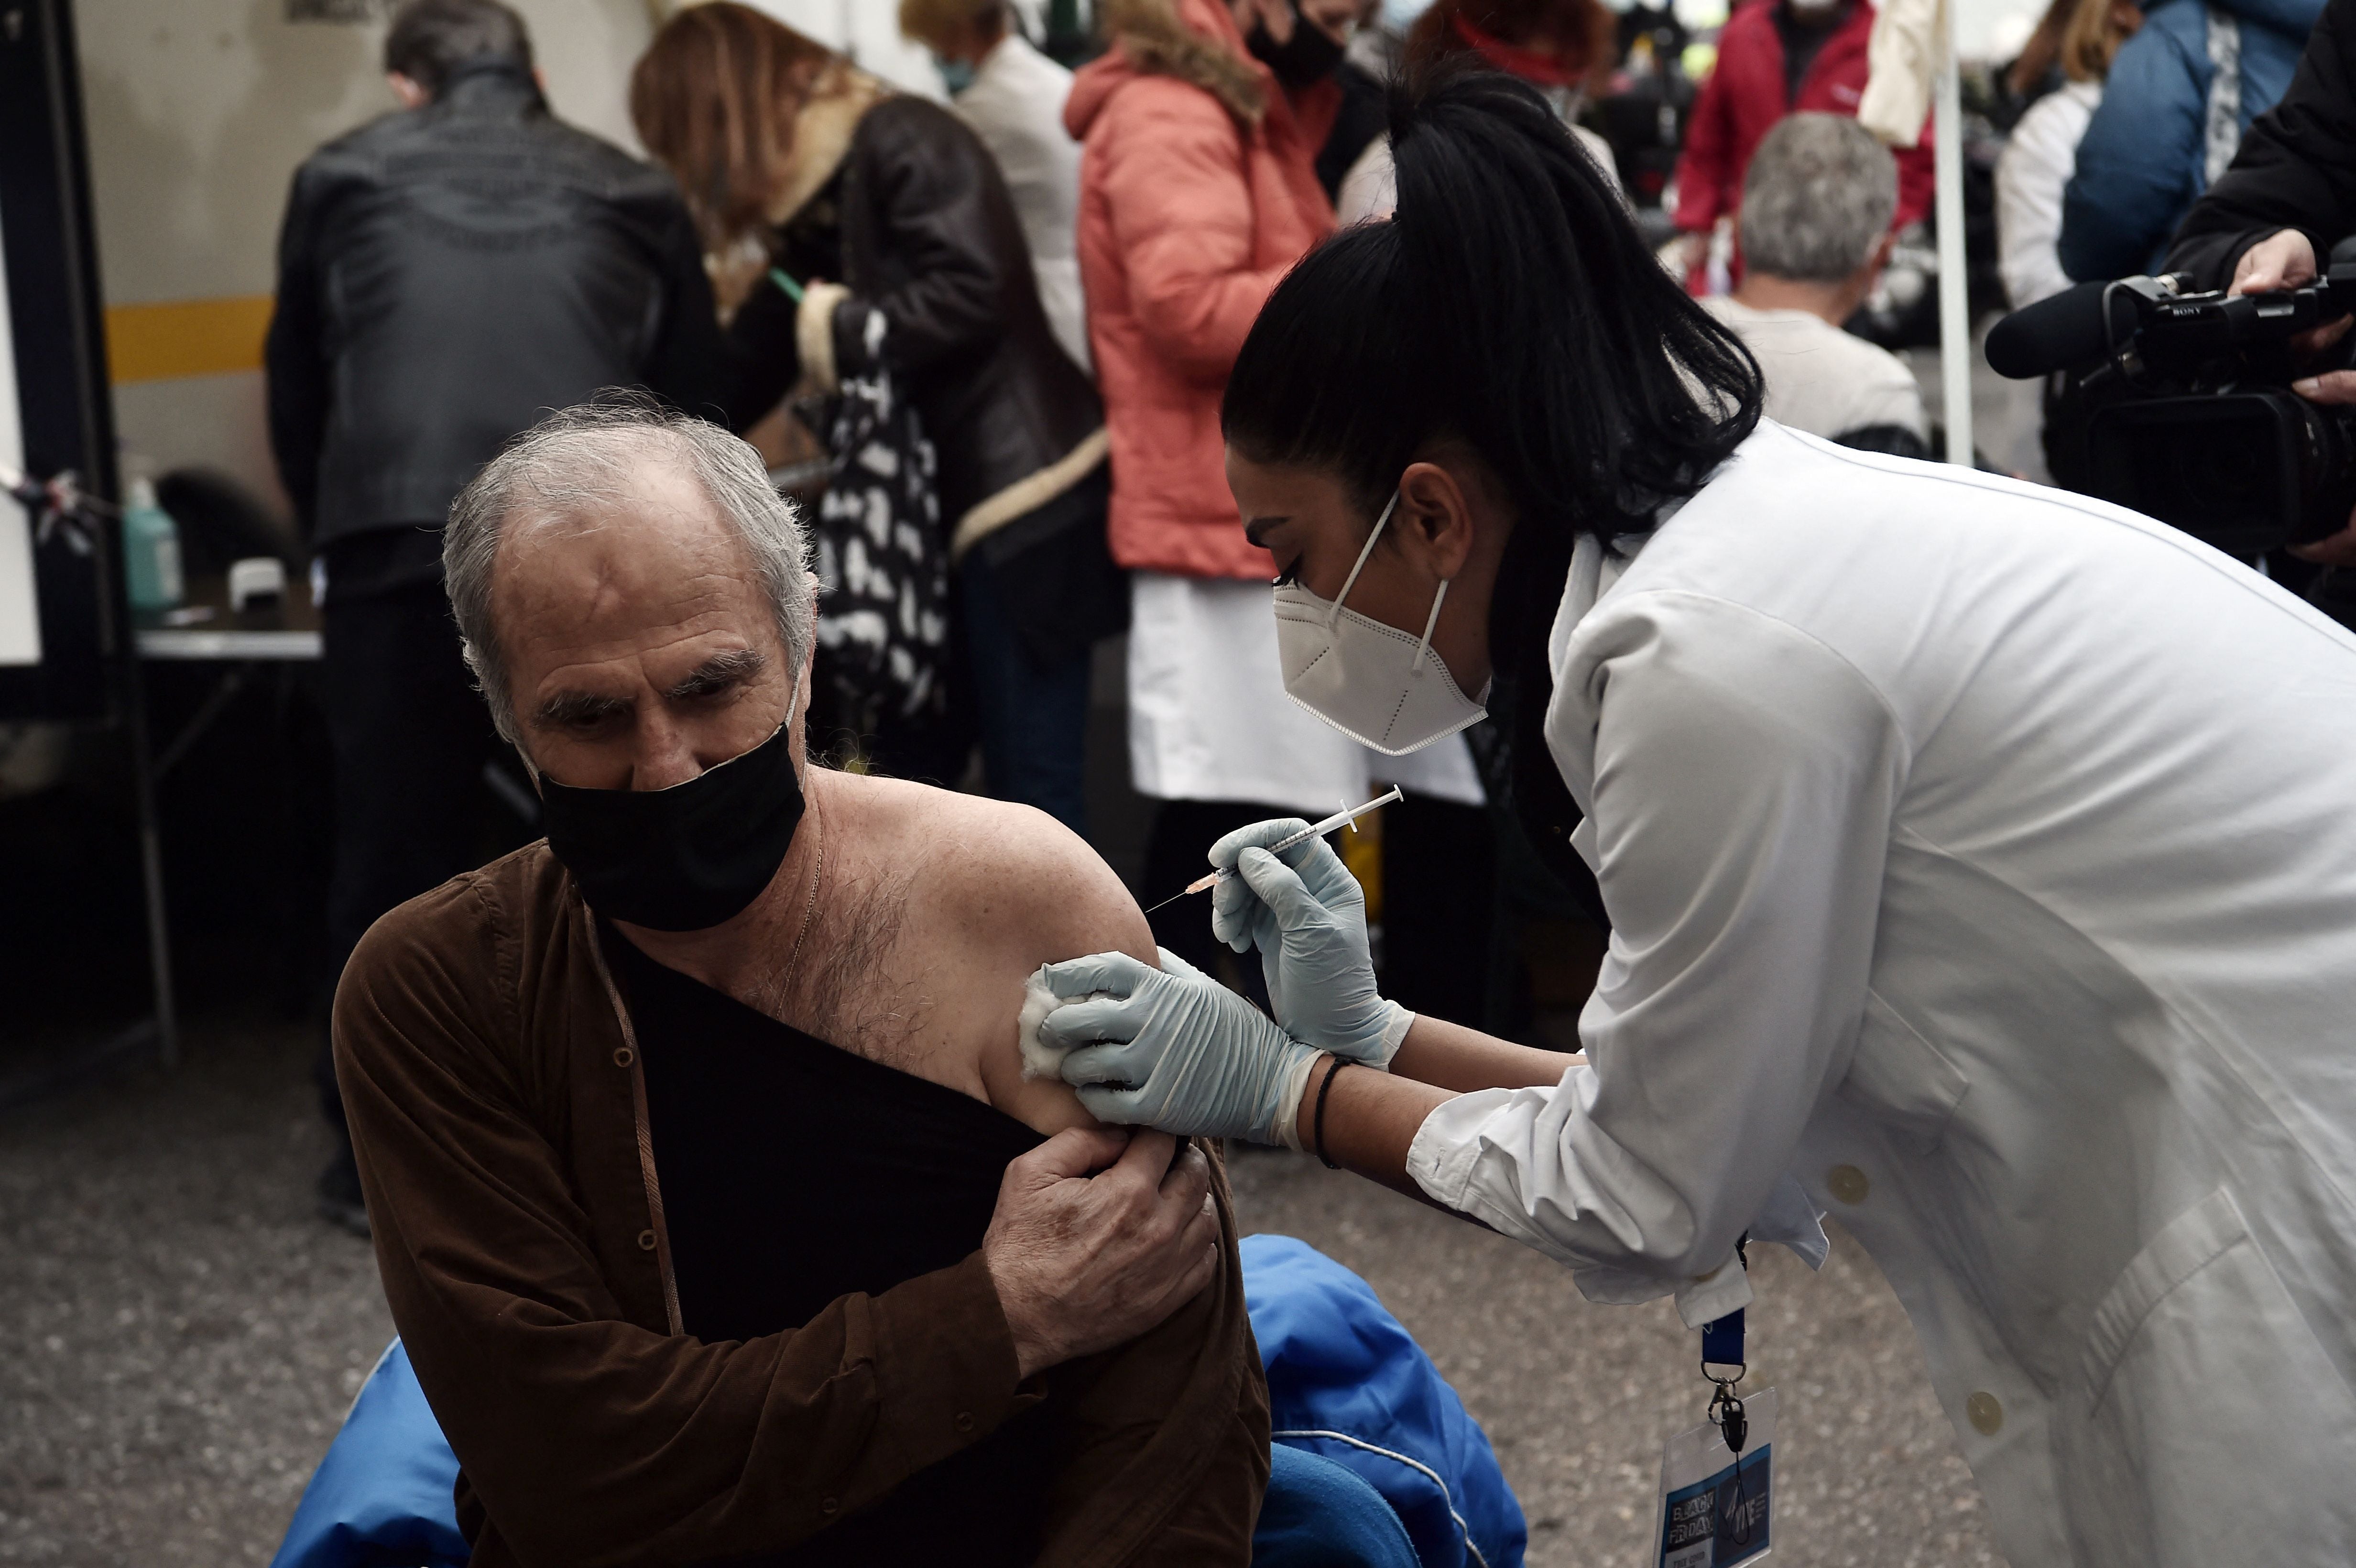 A man receives a dose of the Covid-19 vaccine in Thessaloniki